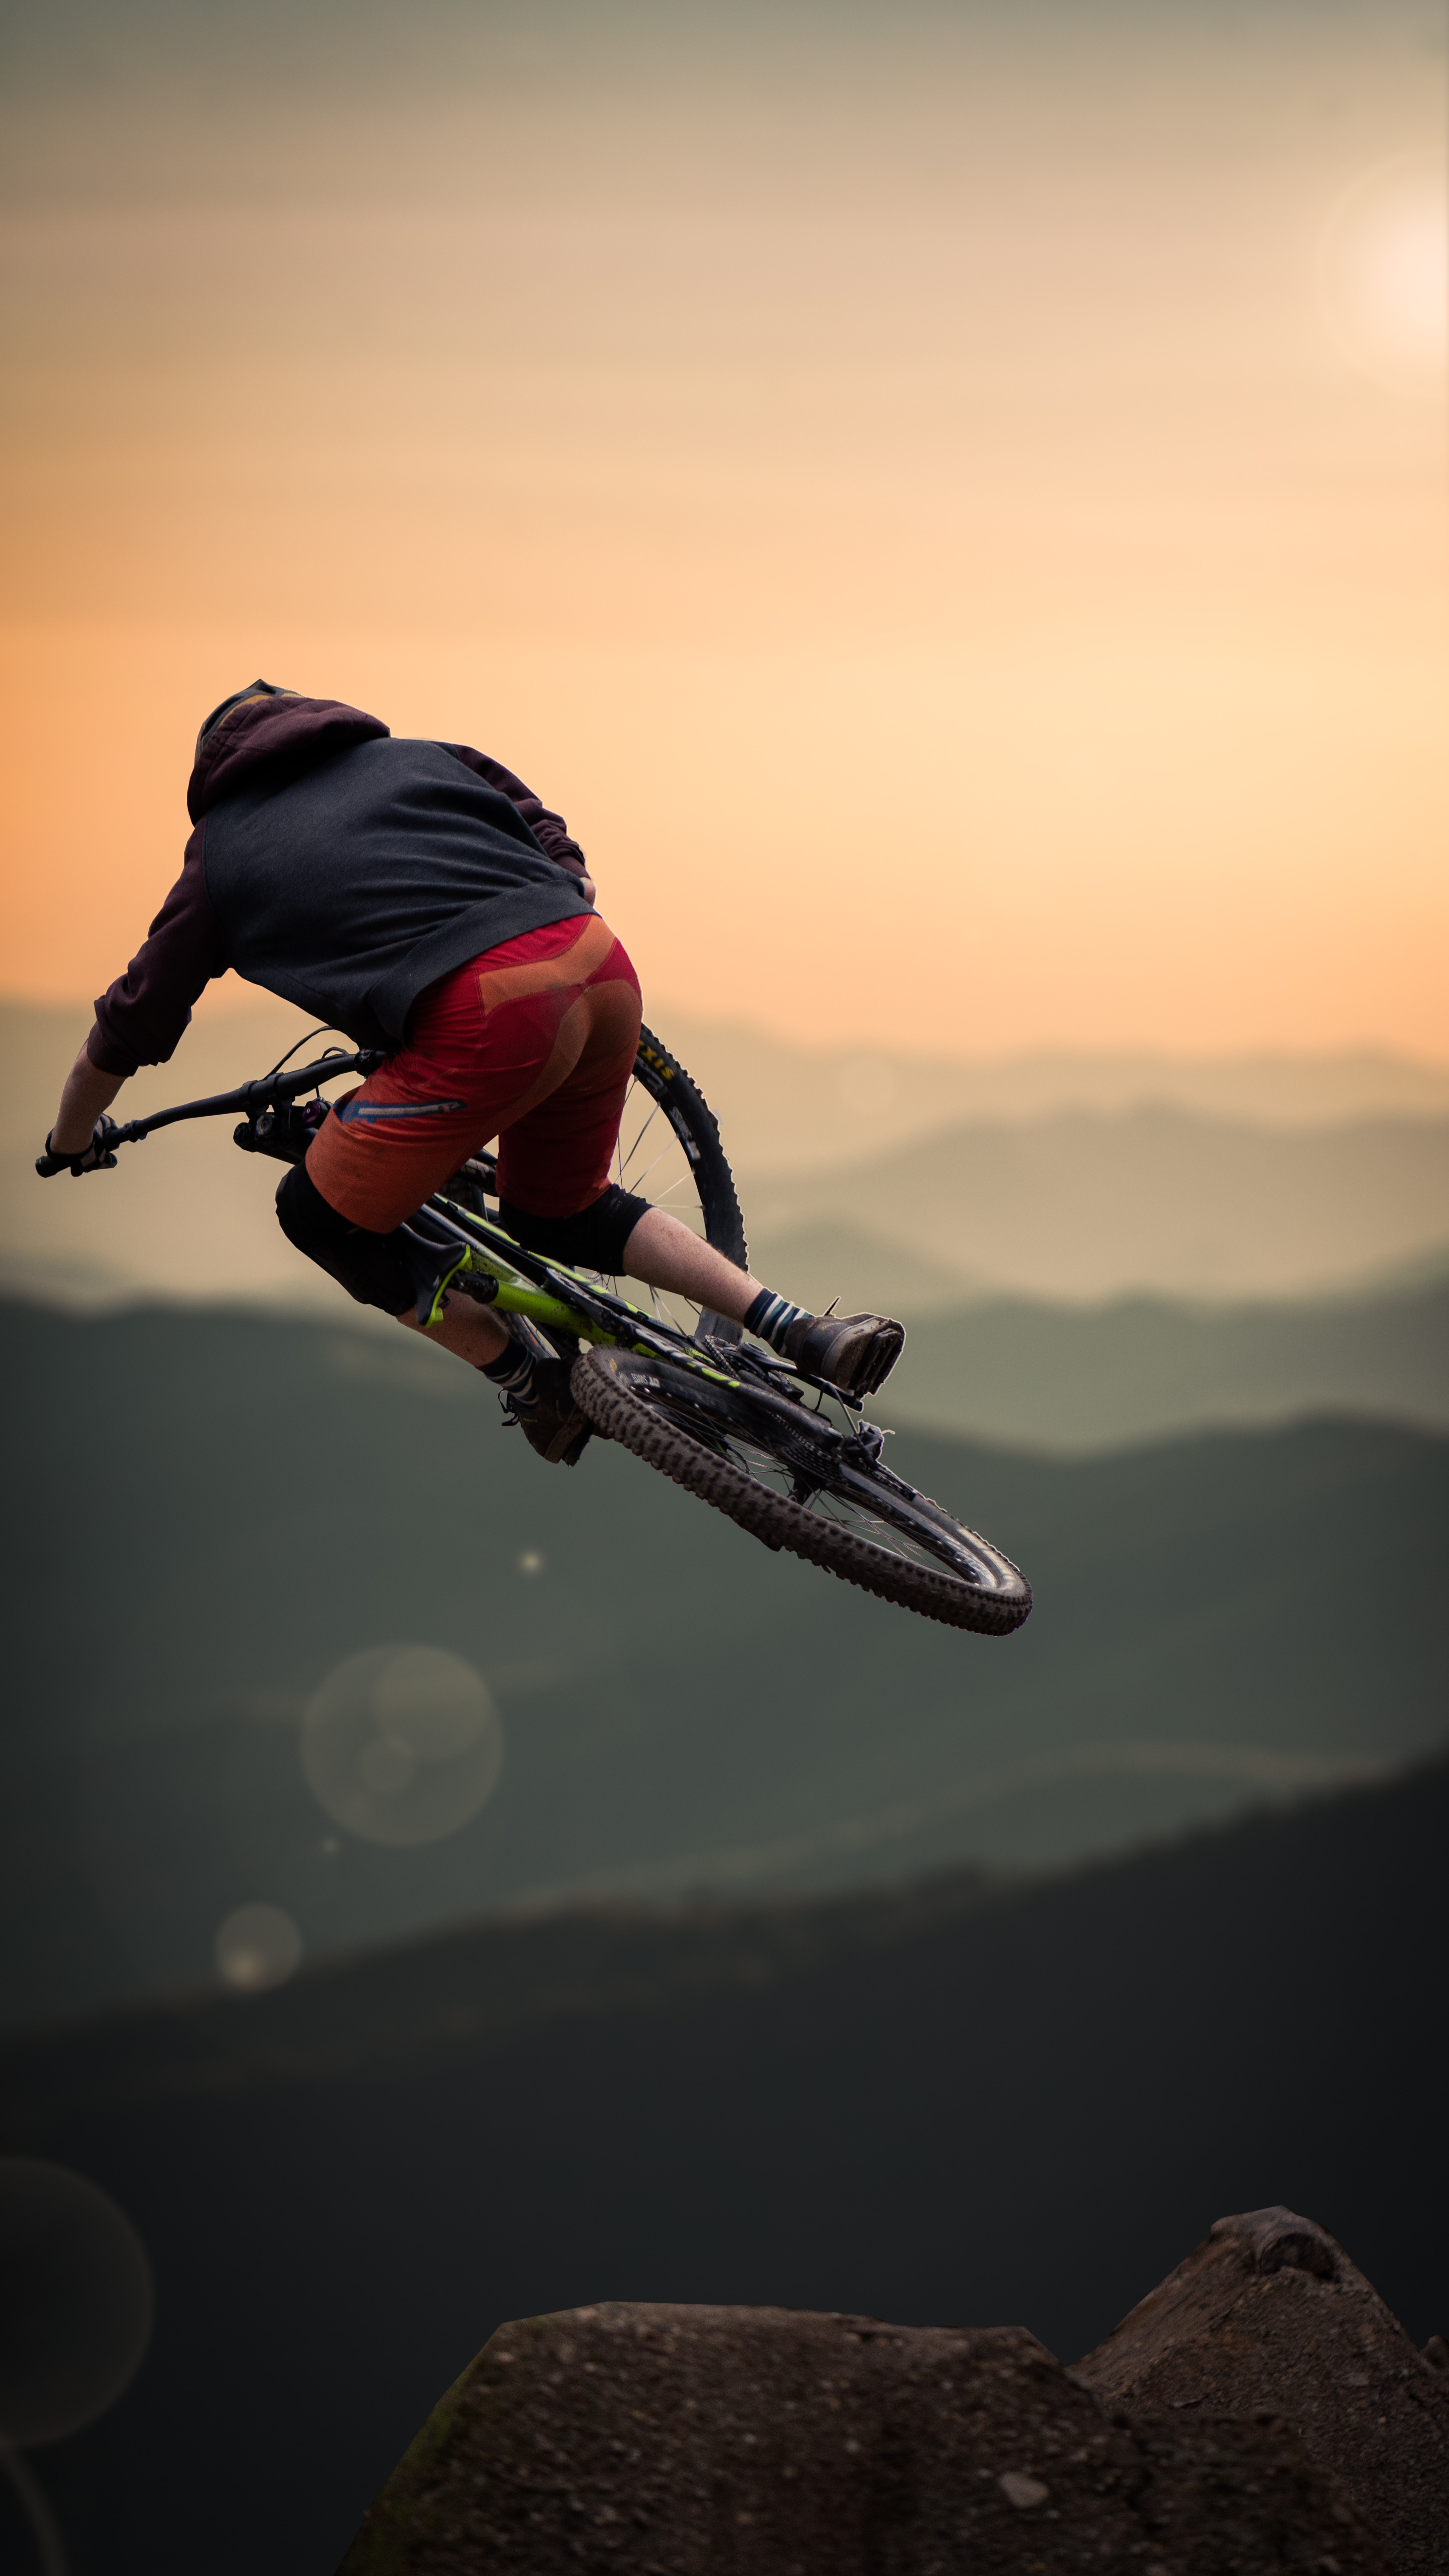 cyclist, bicycle, sports, helmet, bounce, jump, trick